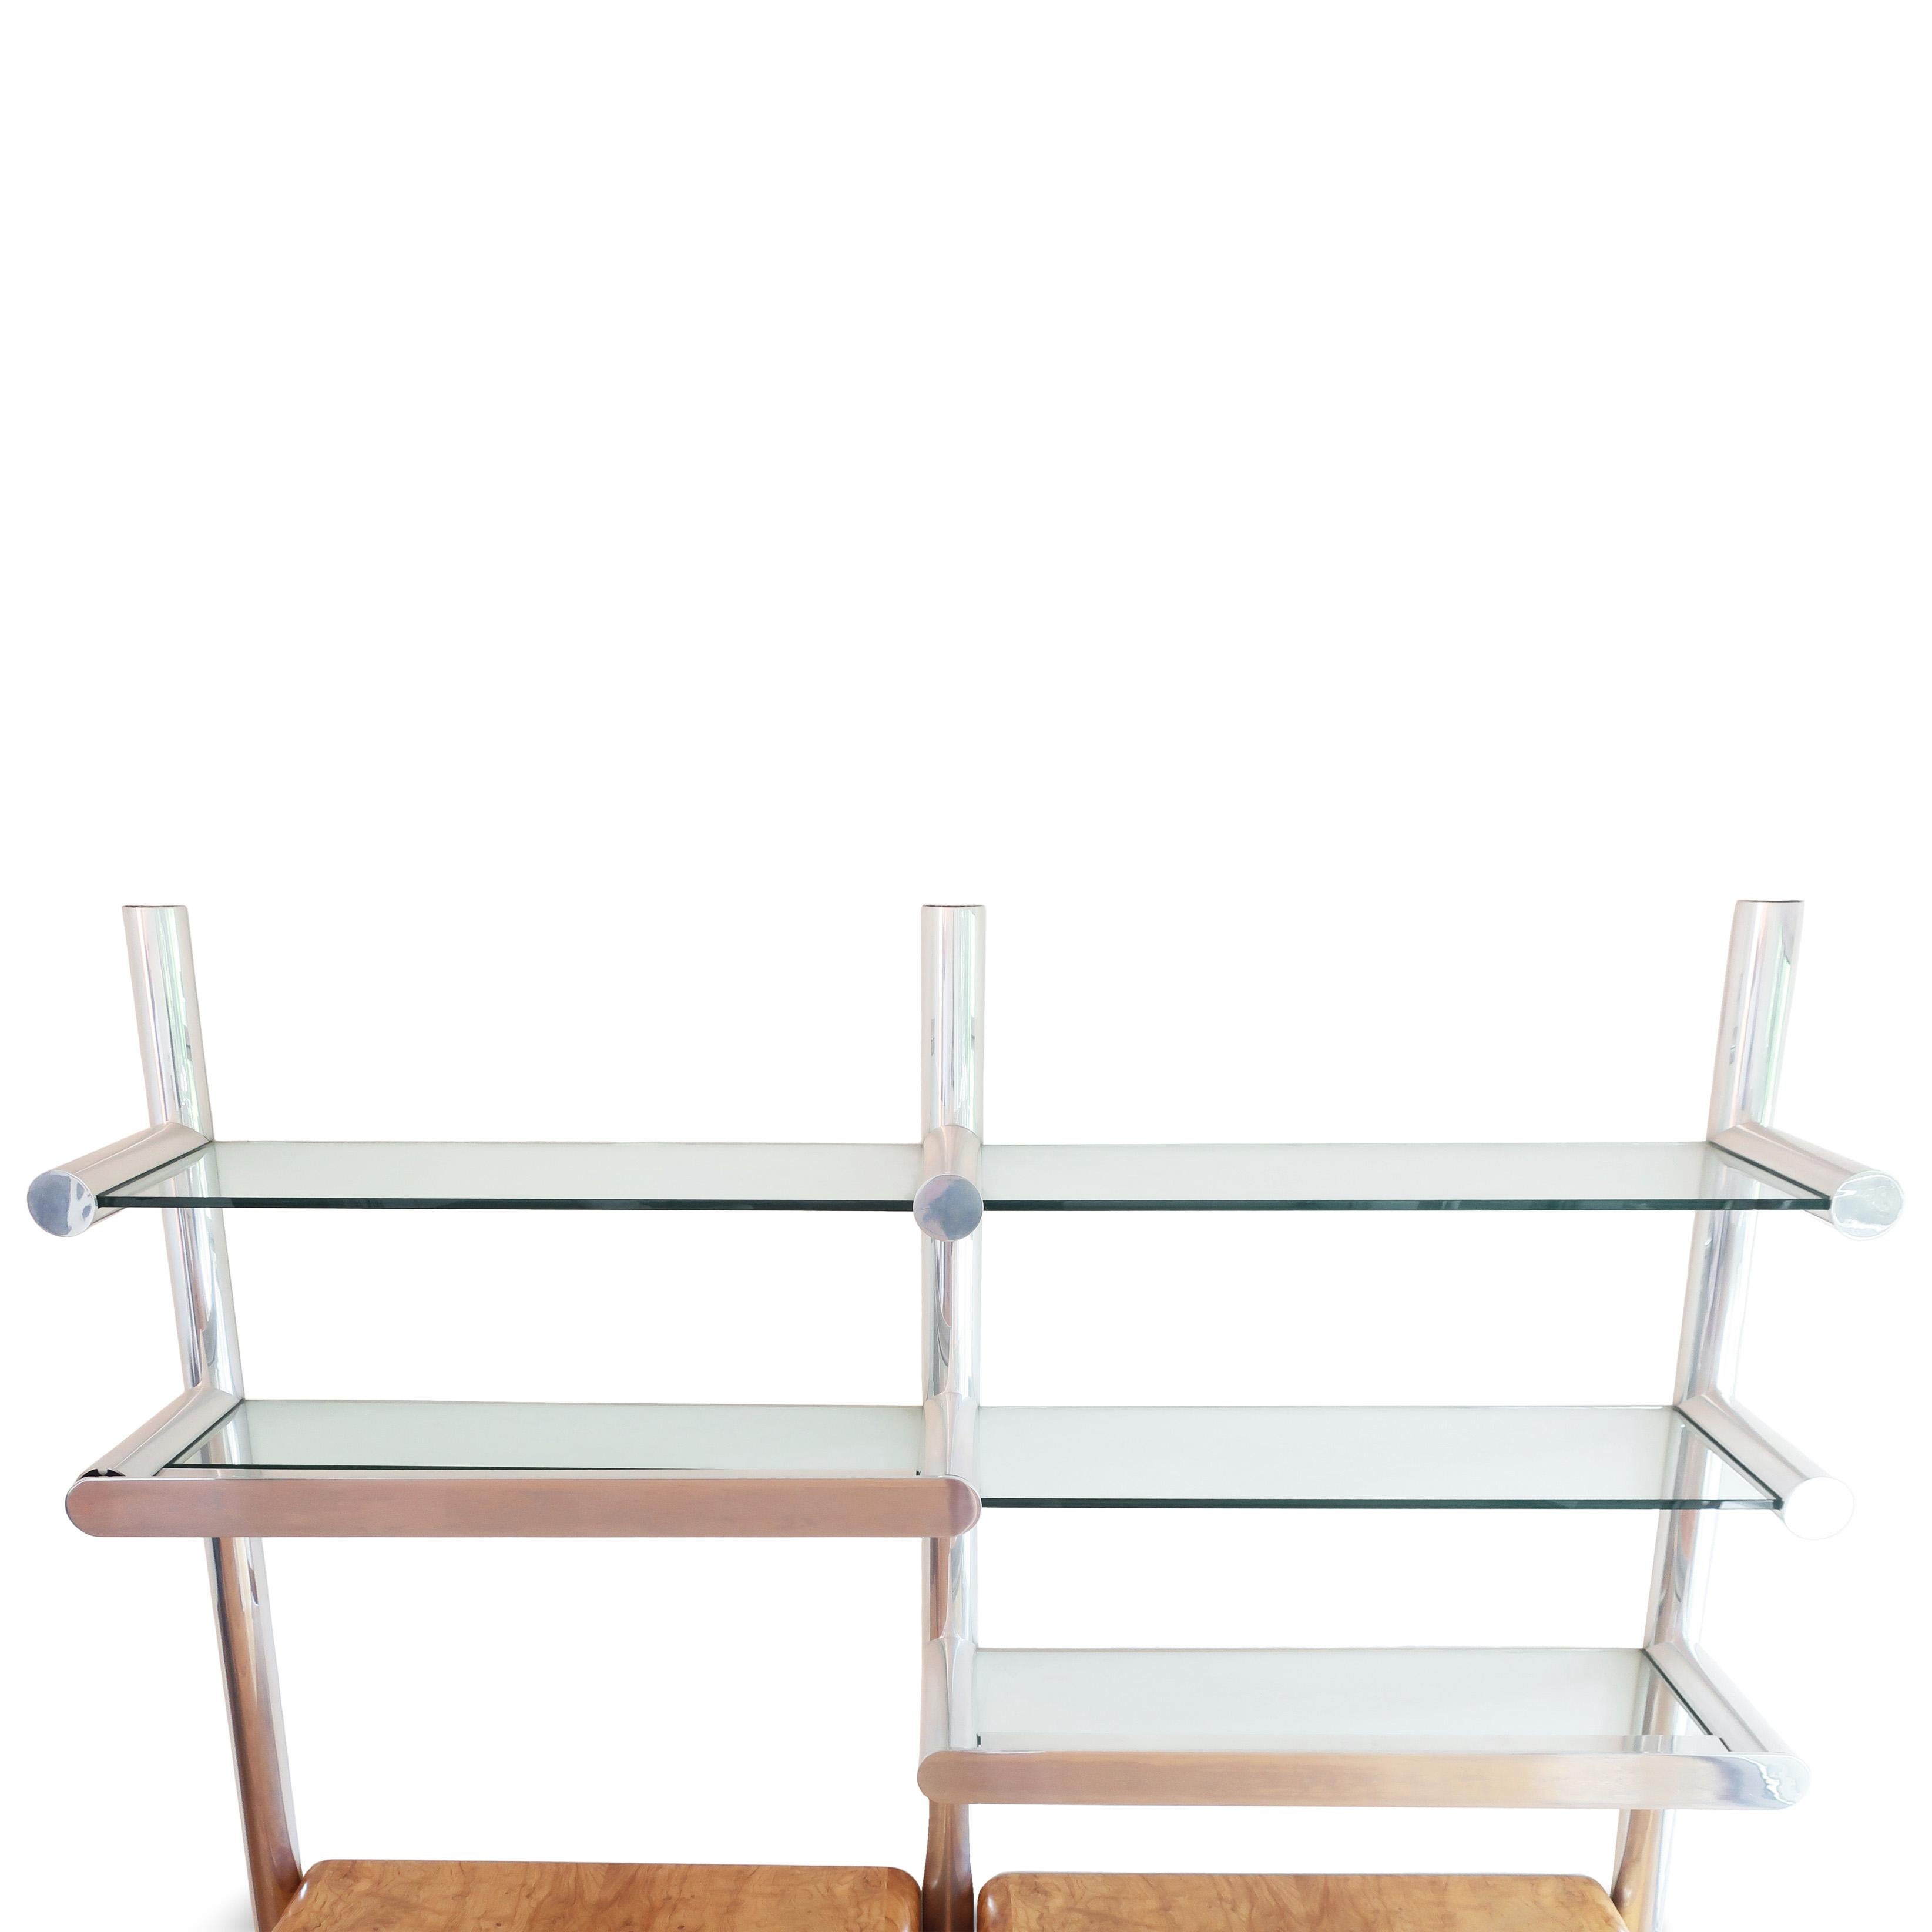 20th Century 1970s Aluminum and Glass Orba Wall Unit by Janet Schweitzer for Pace Collection For Sale